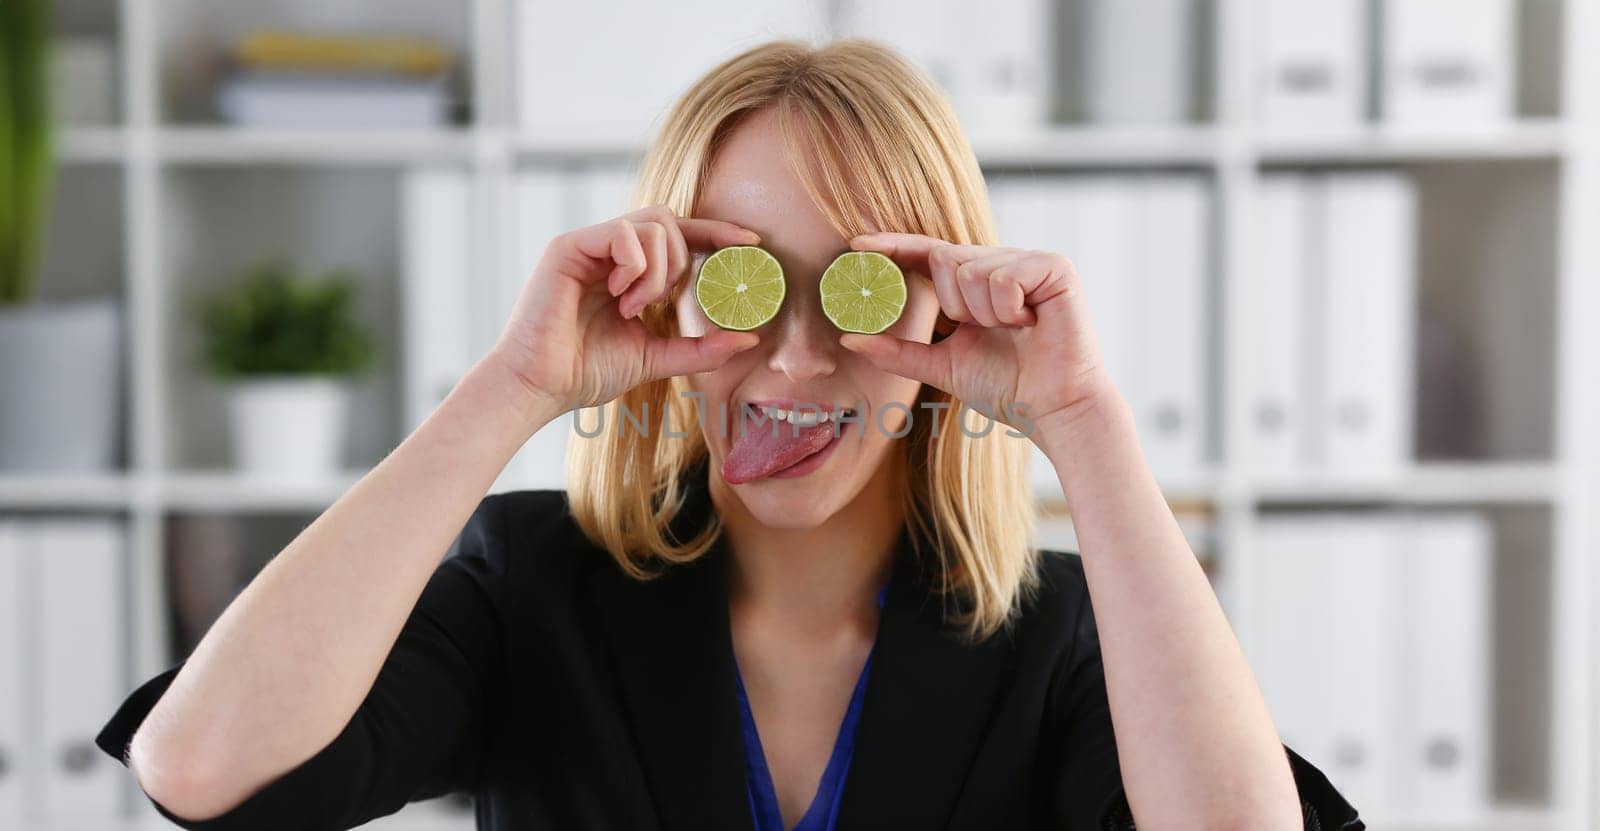 Female hands hold a cut fruit at eye level instead of glasses. The theme of a healthy diet for withdrawal activities and belief in diet achievements in business and education.